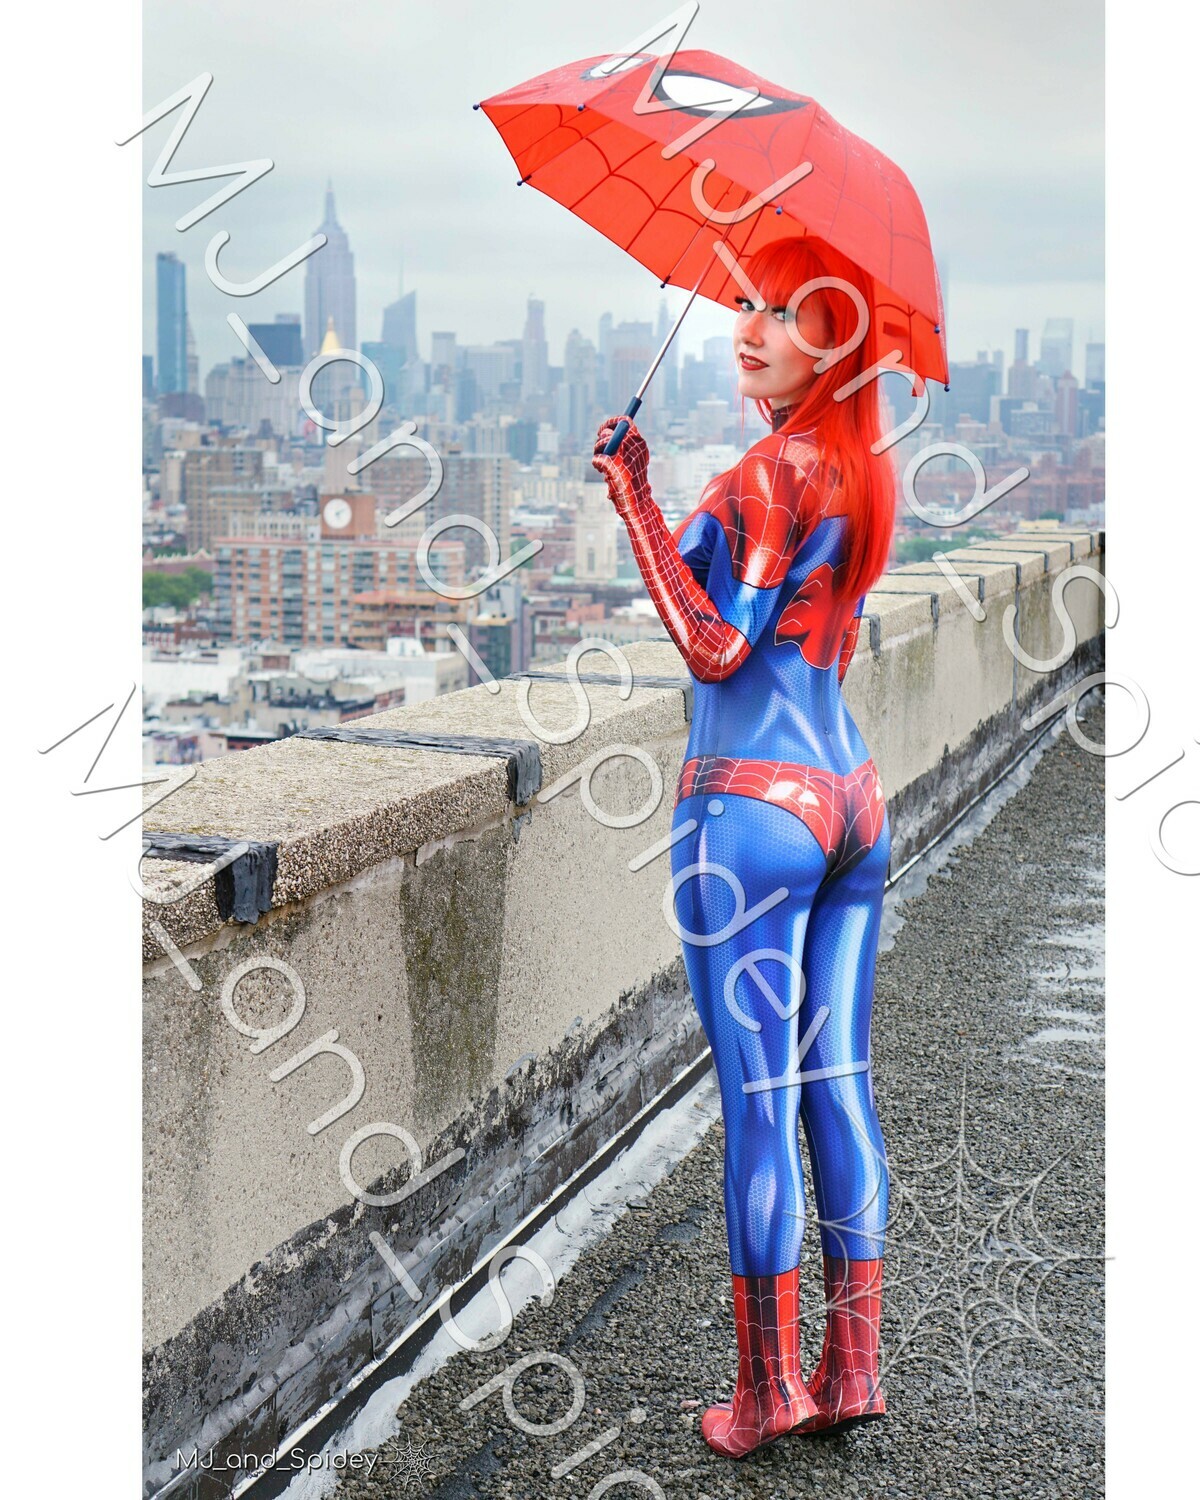 Marvel - Spider-Man - Mary Jane Watson - Classic Spider-Suit - NYC 1 -  Cosplay Print (@MJ_and_Spidey, MJ and Spidey, Comics)